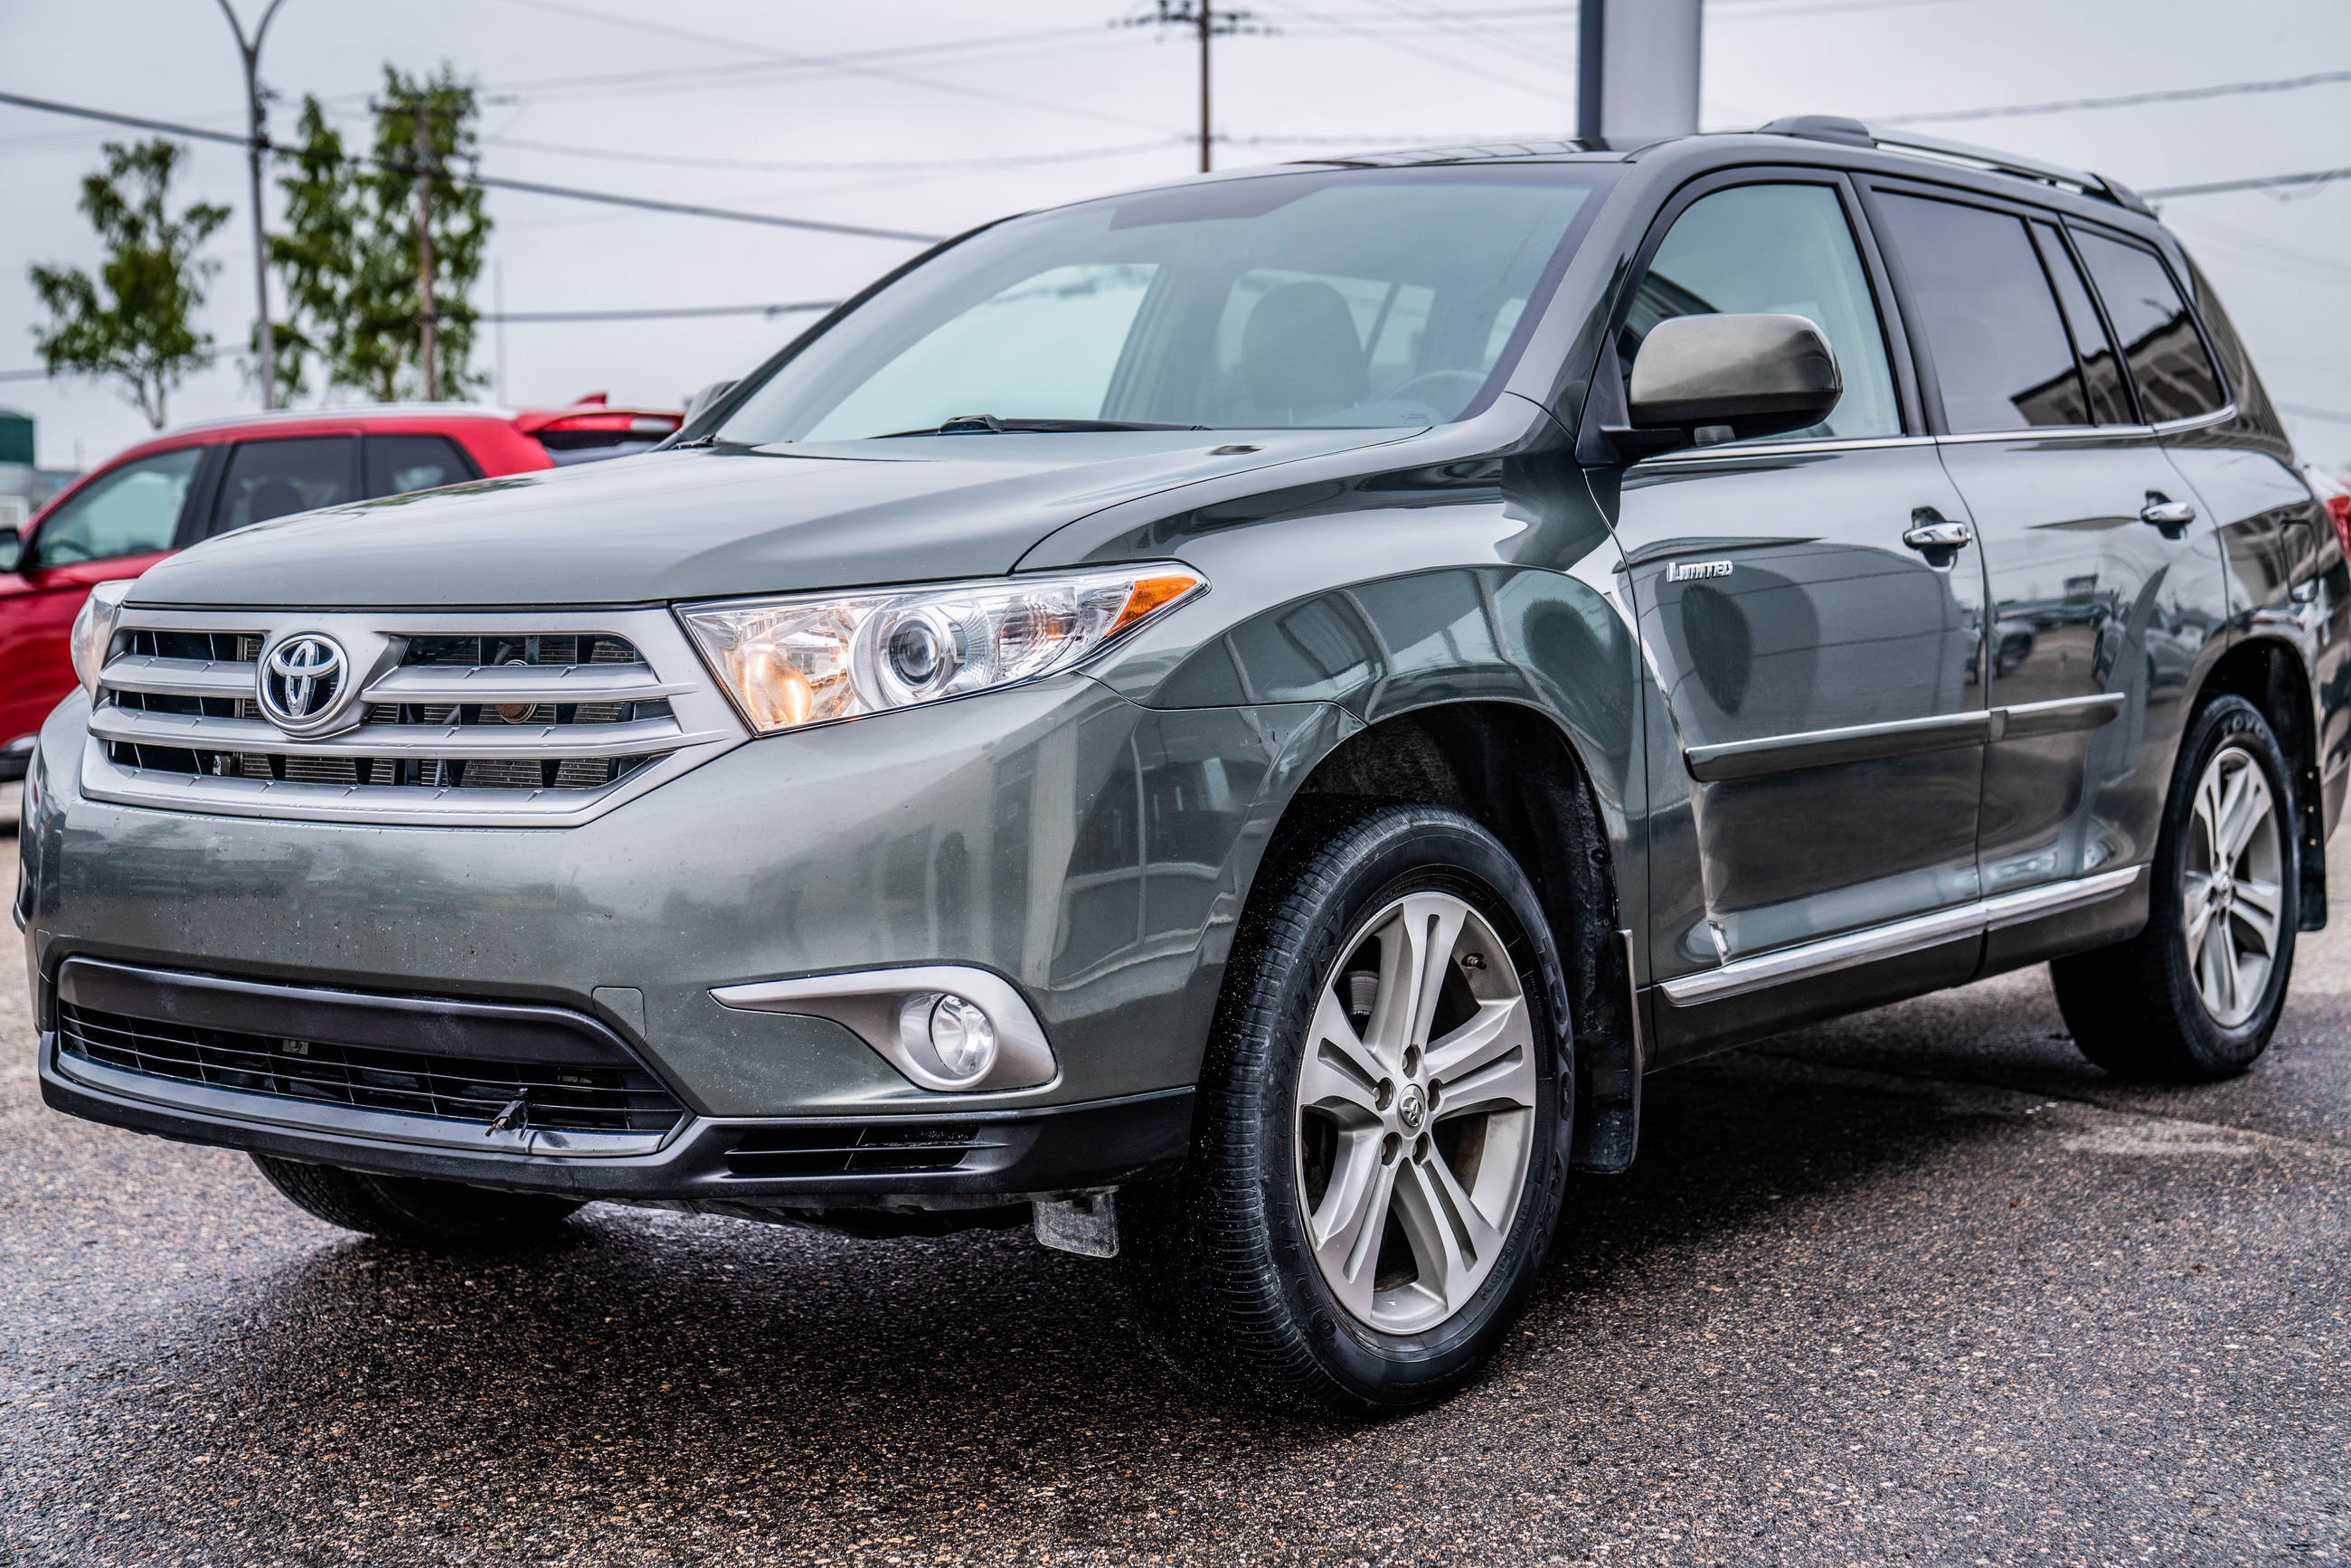 Used 2013 Toyota Highlander Limited Awd Cuir A C Bas Kilo In Sept Iles Used Inventory Sept Iles Kia In Sept Iles Quebec